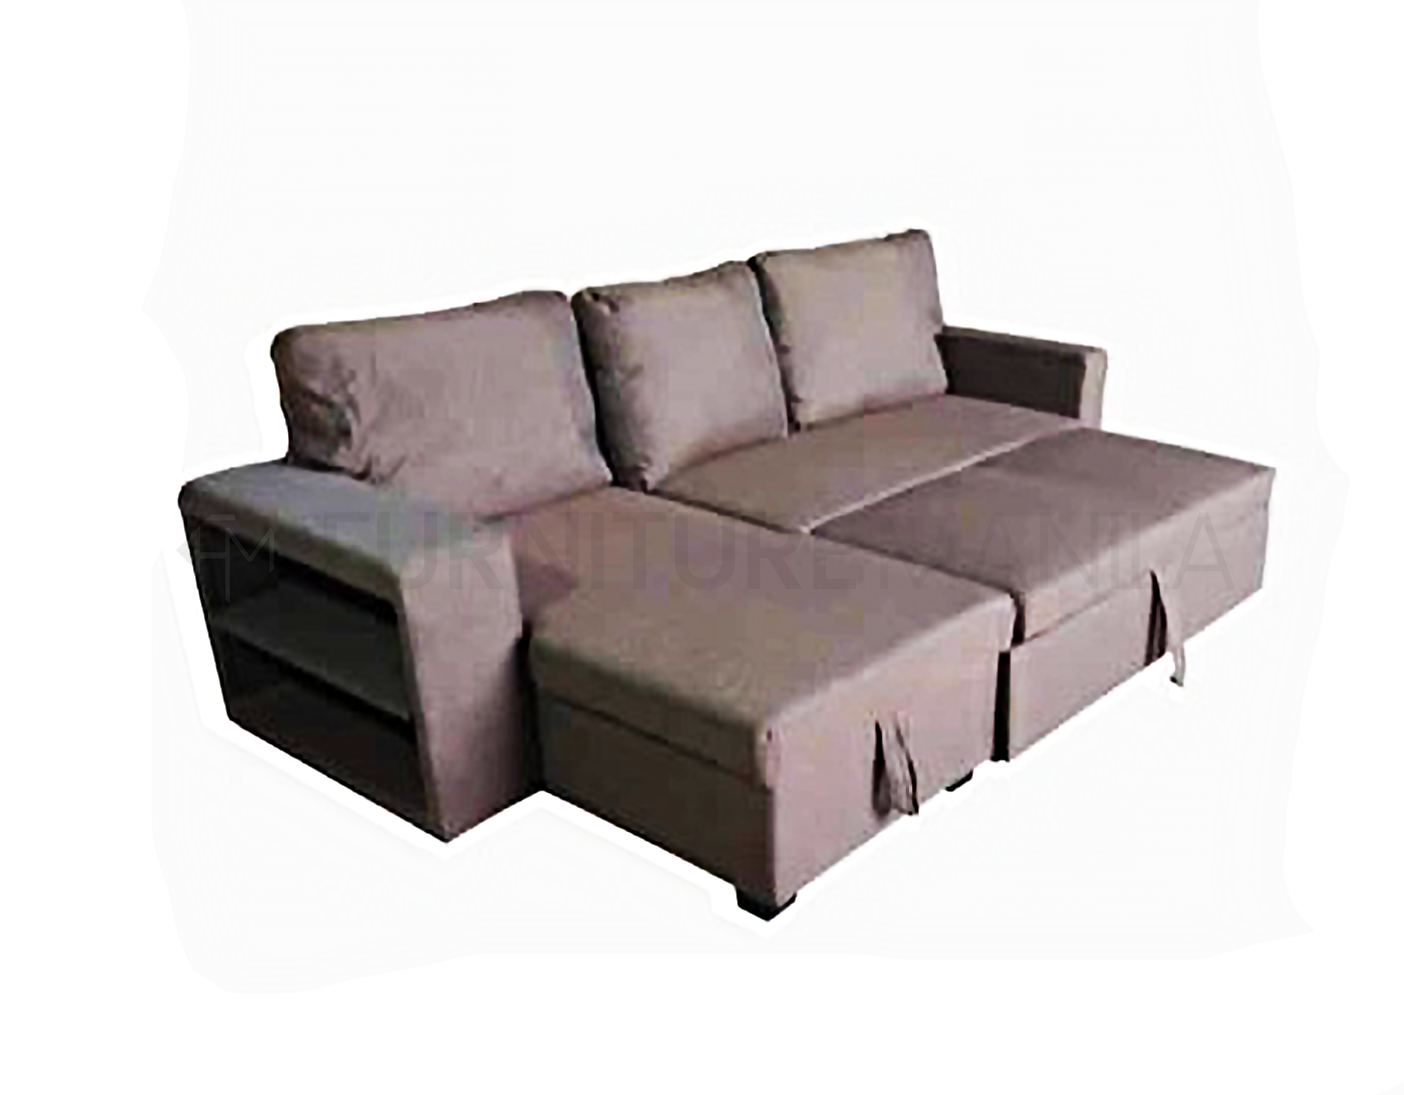 Fb2008 Sofa With Pull Out Bed And Storage Furniture Manila